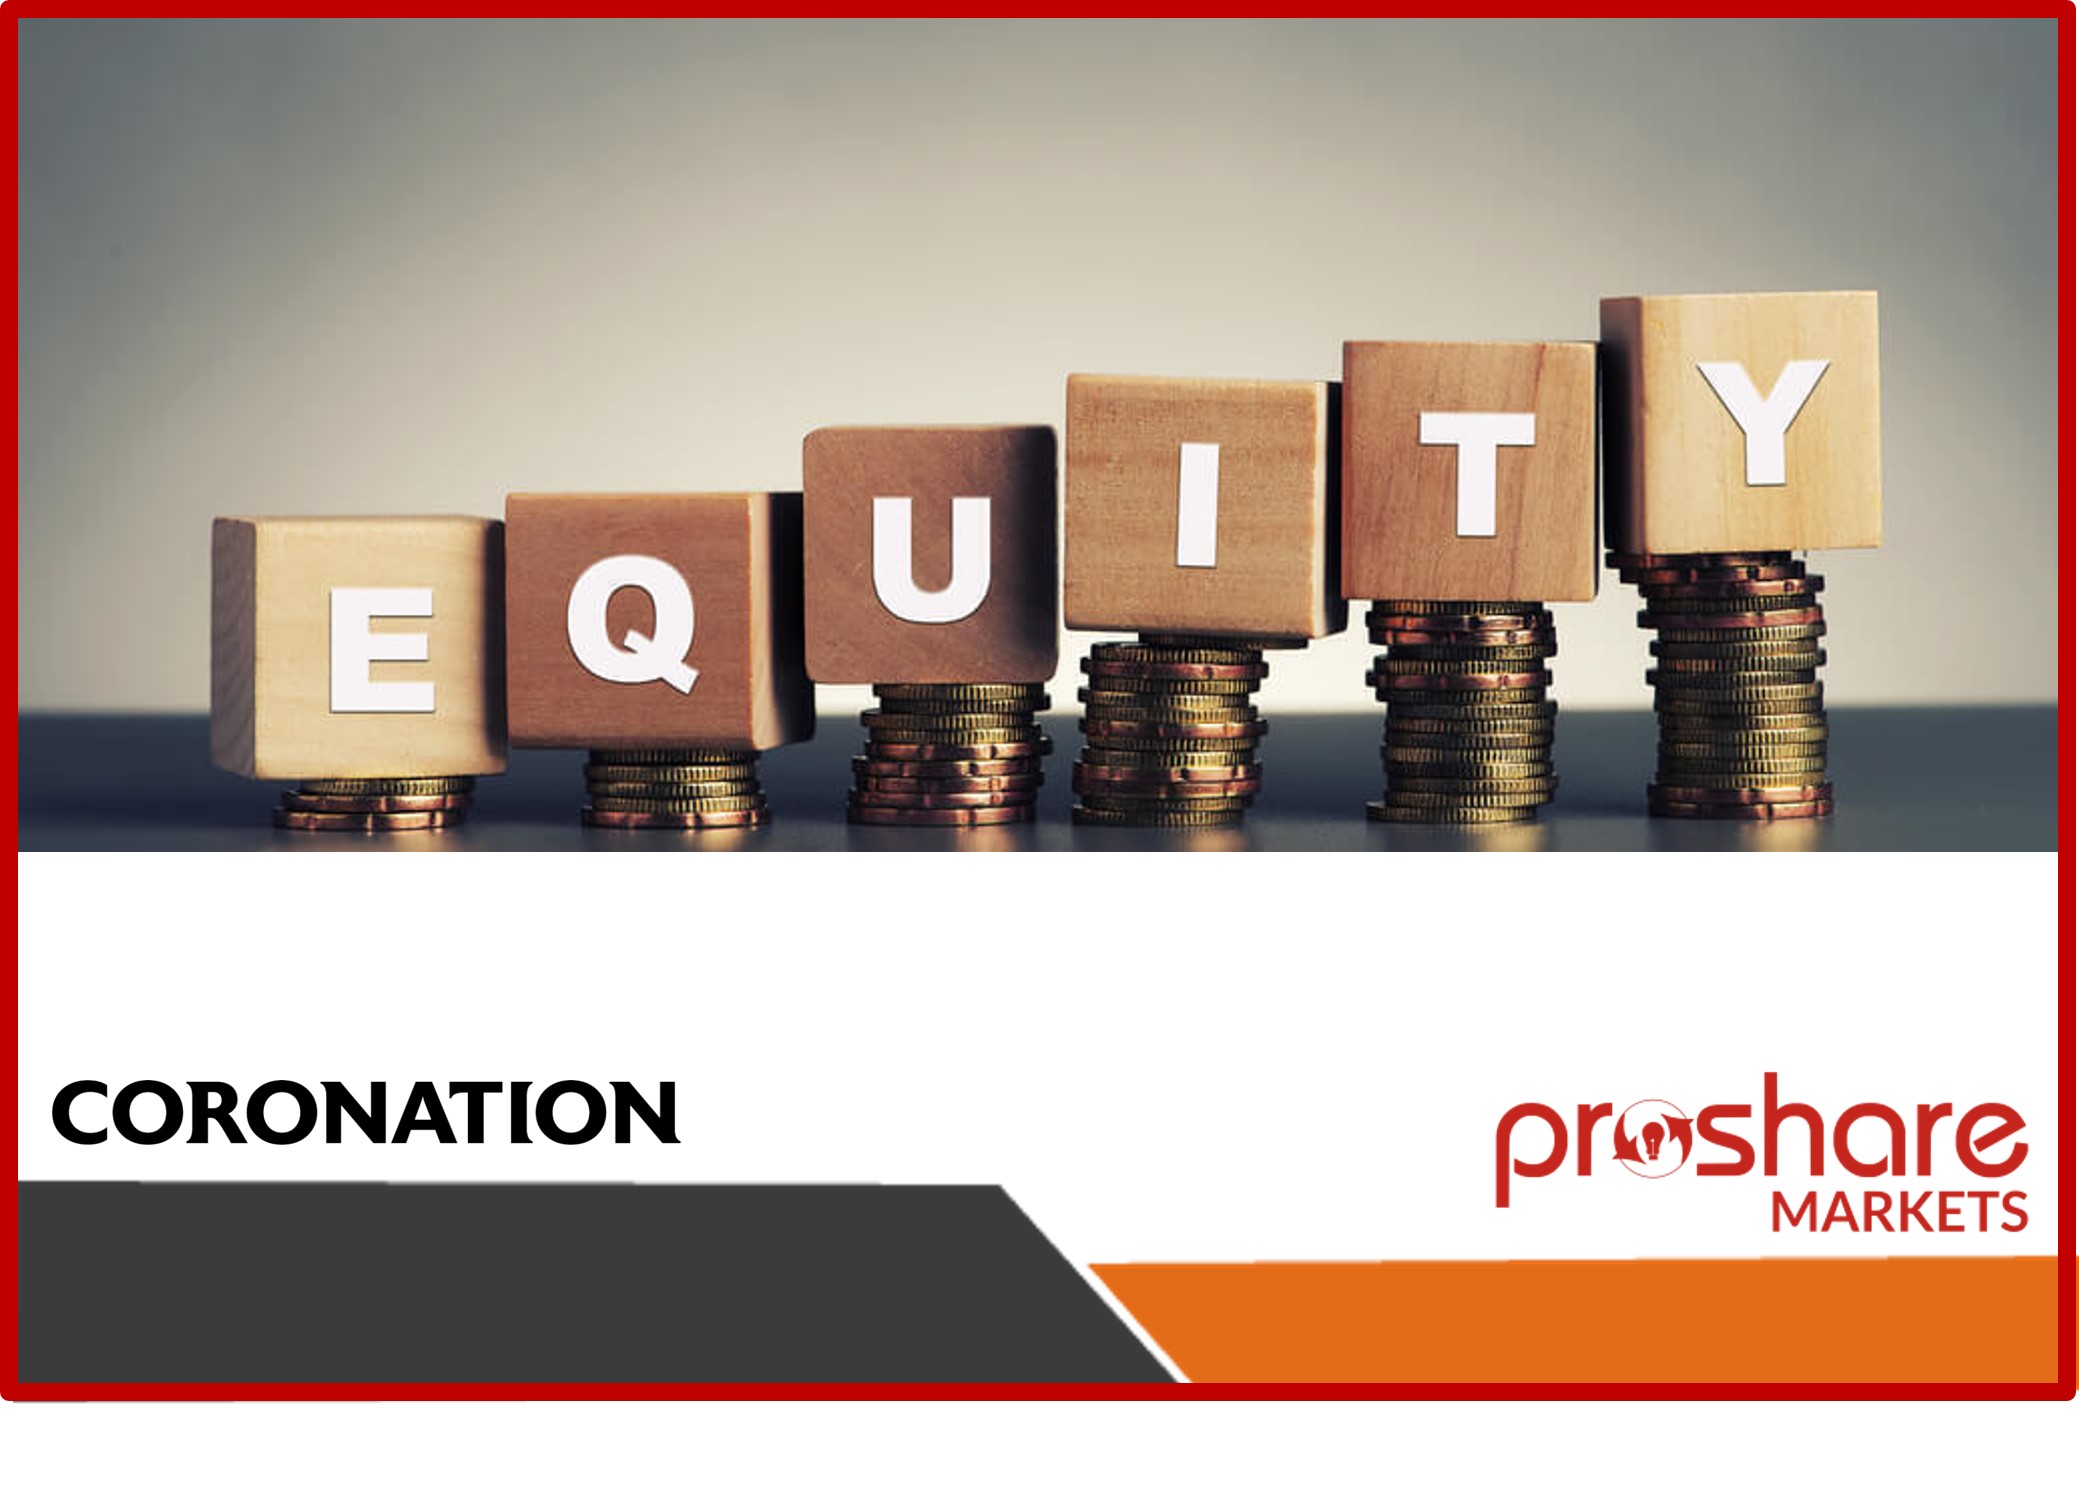 What Makes a Good Equity?